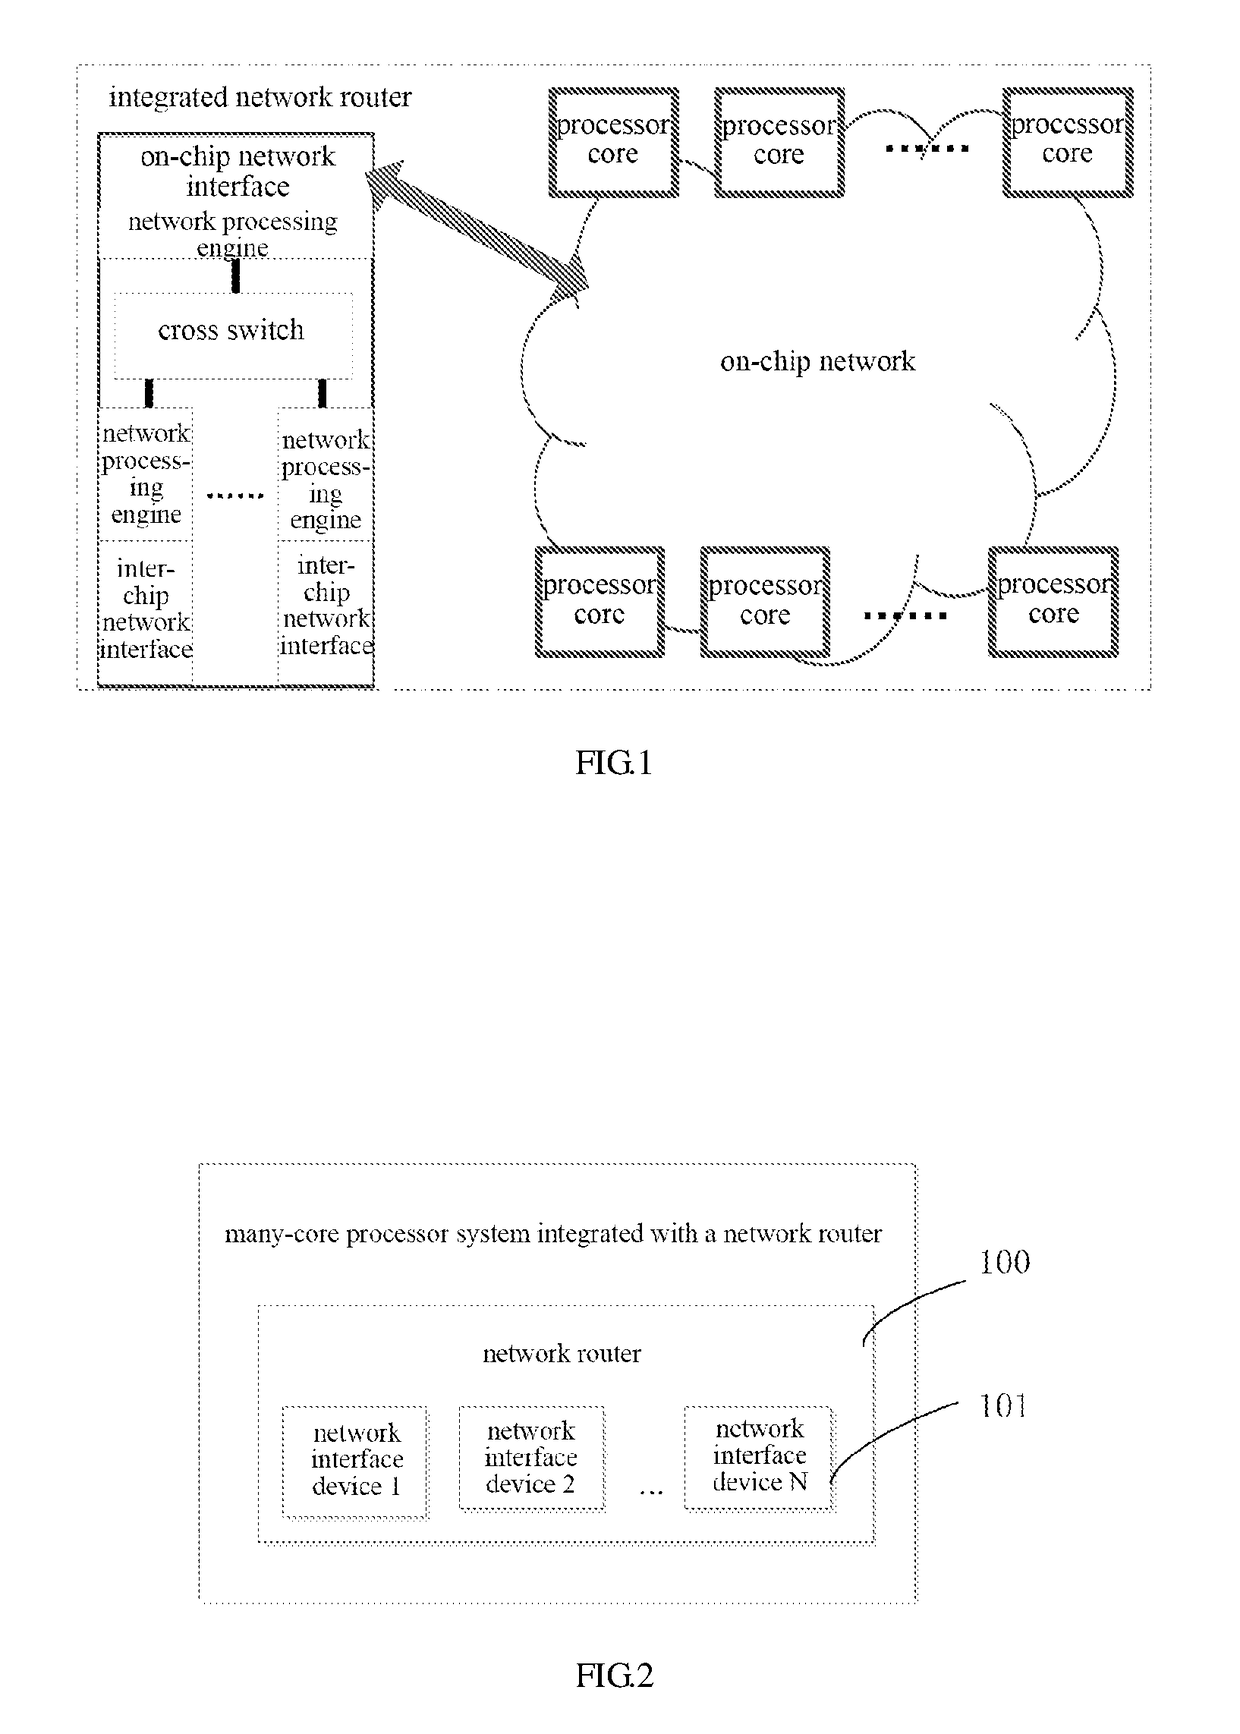 Many-core processor system integrated with network router, and integration method and implementation method thereof